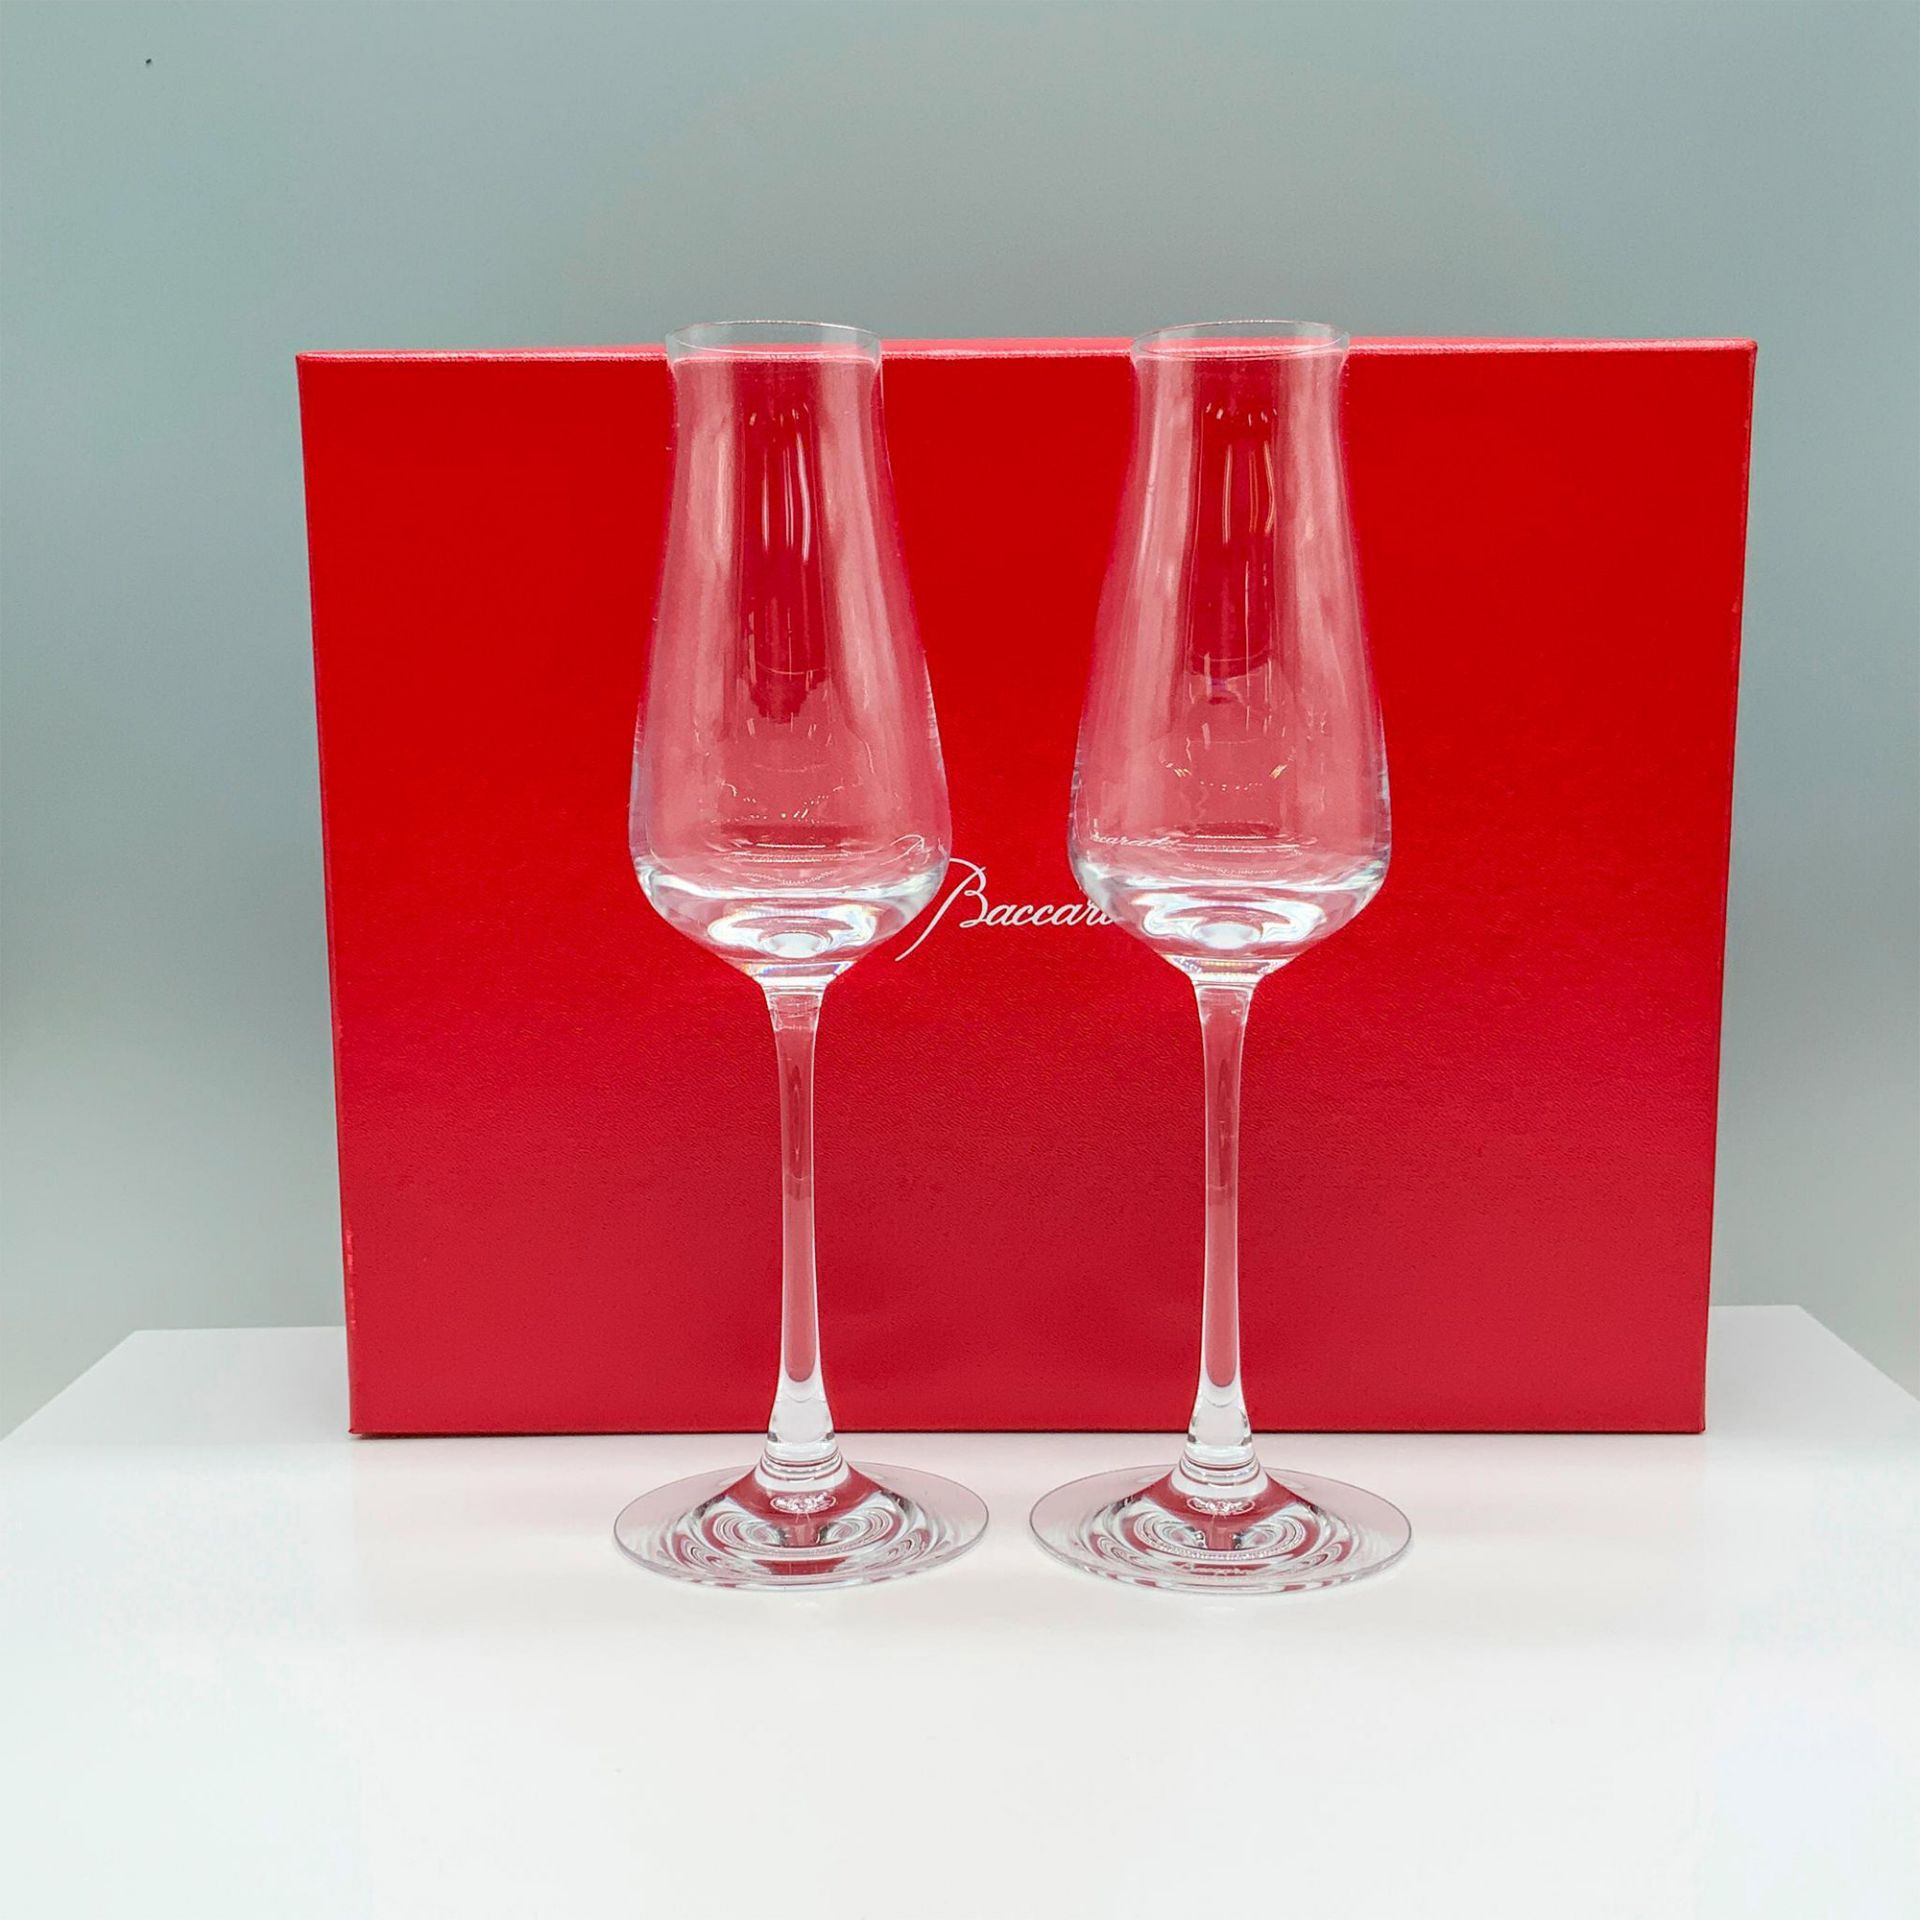 Pair of Baccarat Chateau Glass Champagne Flutes - Image 3 of 3